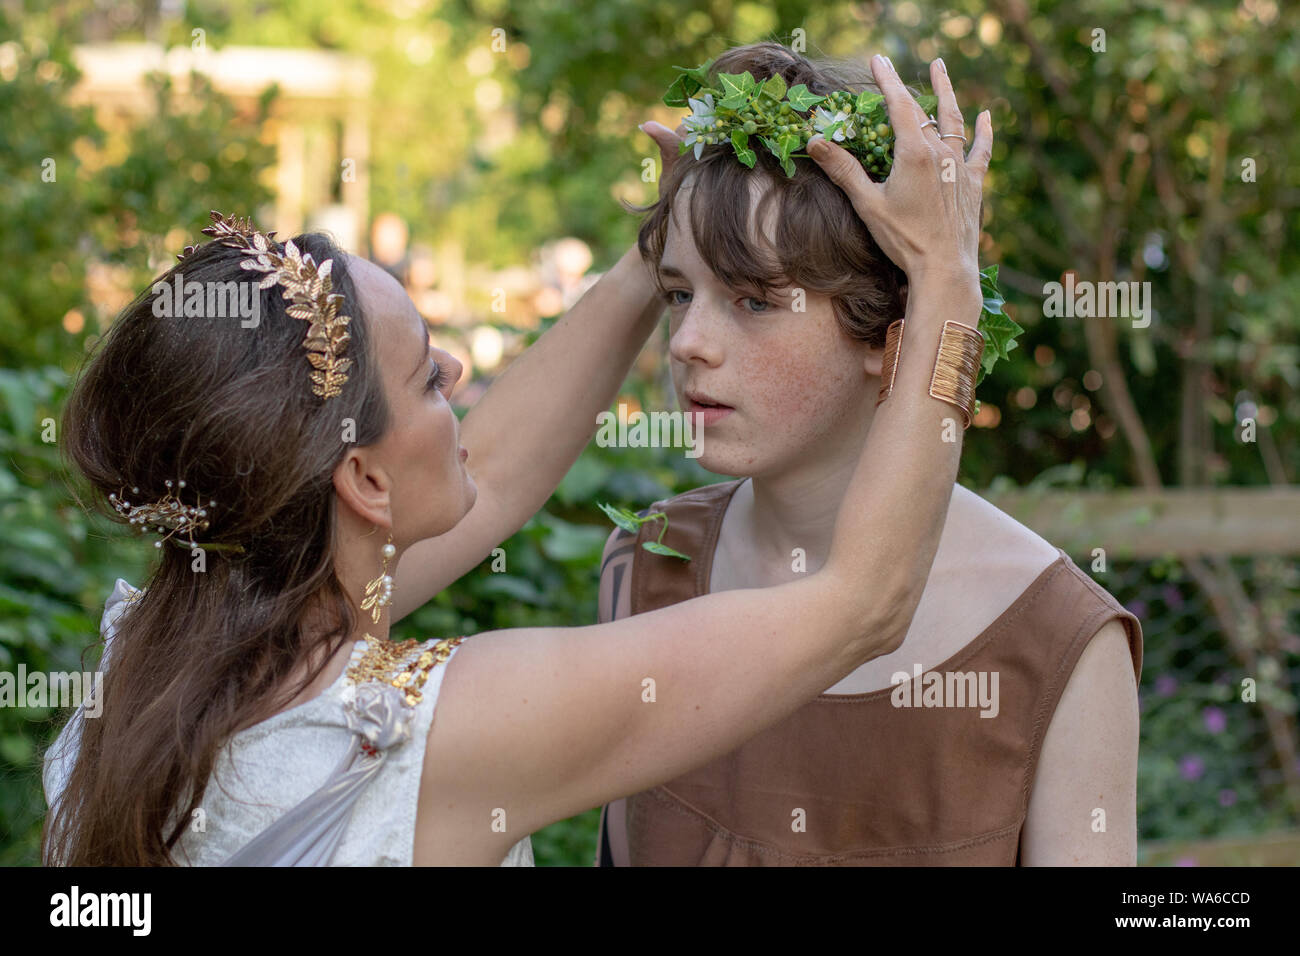 Titania Queen of the Fairies adjusting First Fairy' wreath Stock Photo